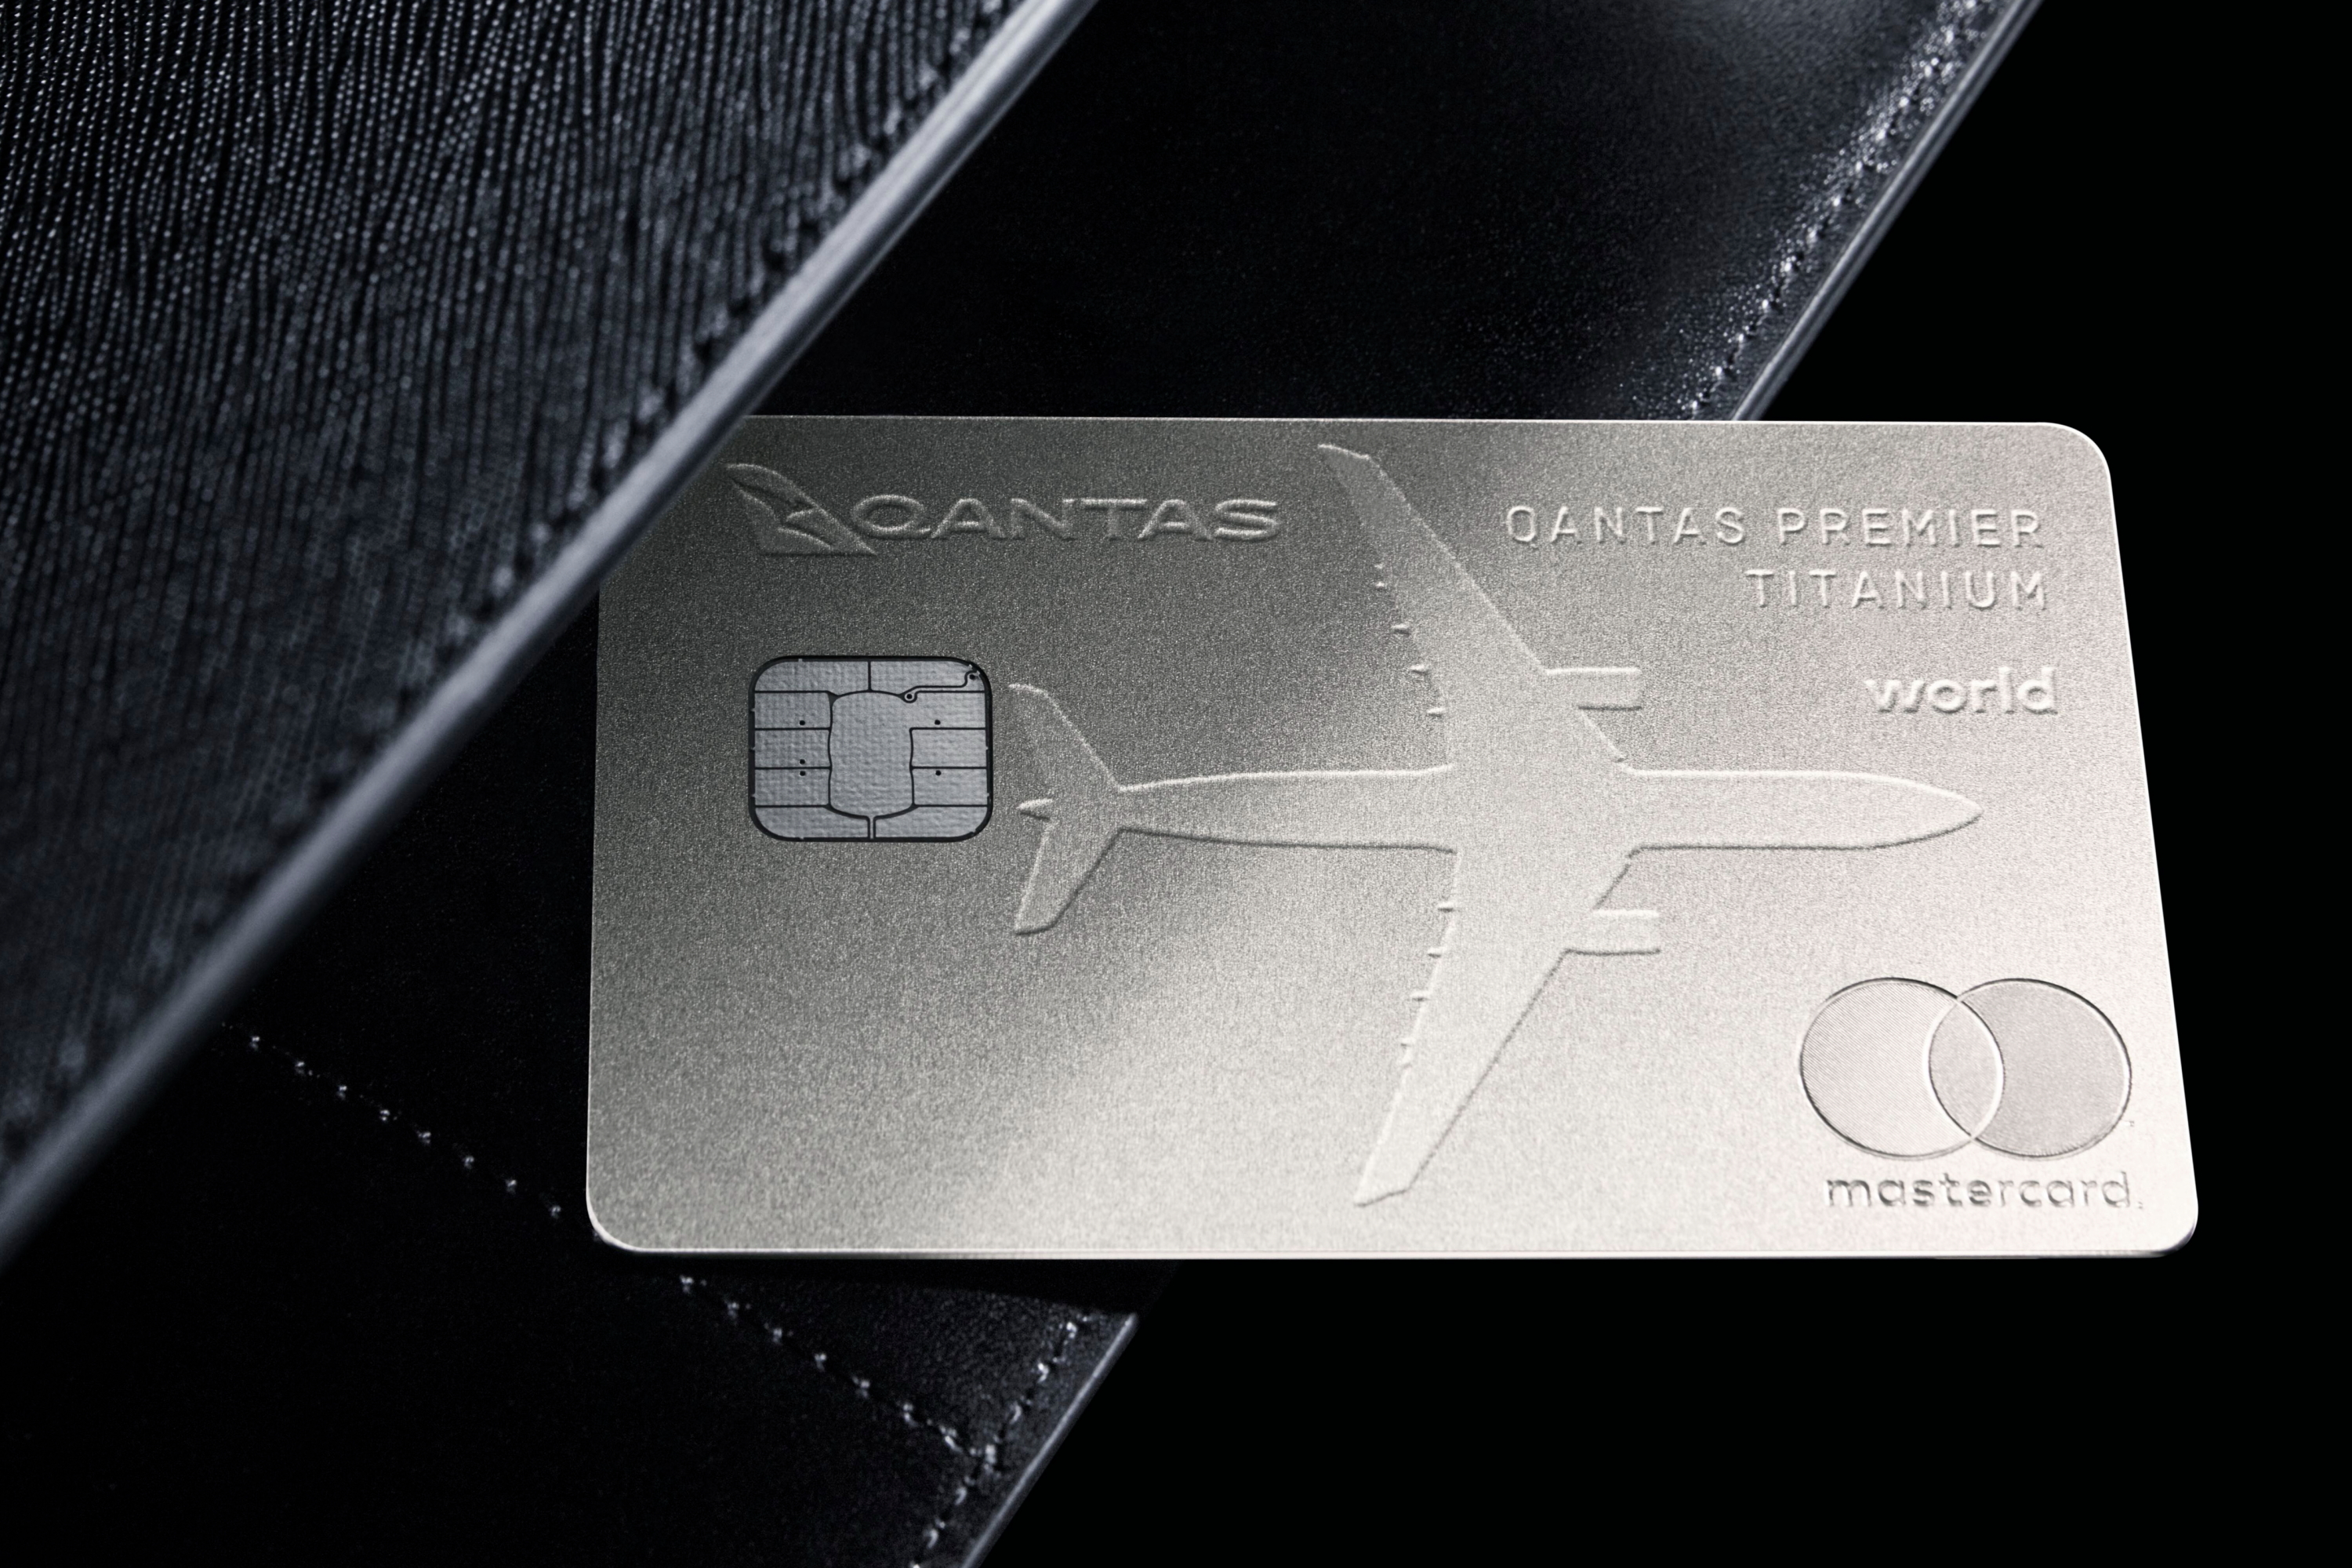 Qantas has launched a credit card that offers Qantas First Class Lounge access, status credits, flight discounts and potentially enough Qantas Points for a business class flight from Sydney to London upon sign up. The Qantas Premier Titanium MasterCard also offers the highest Qantas Points earn rate and the highest number of sign-up bonus Qantas Points of any MasterCard credit card currently in market. Click to enlarge.